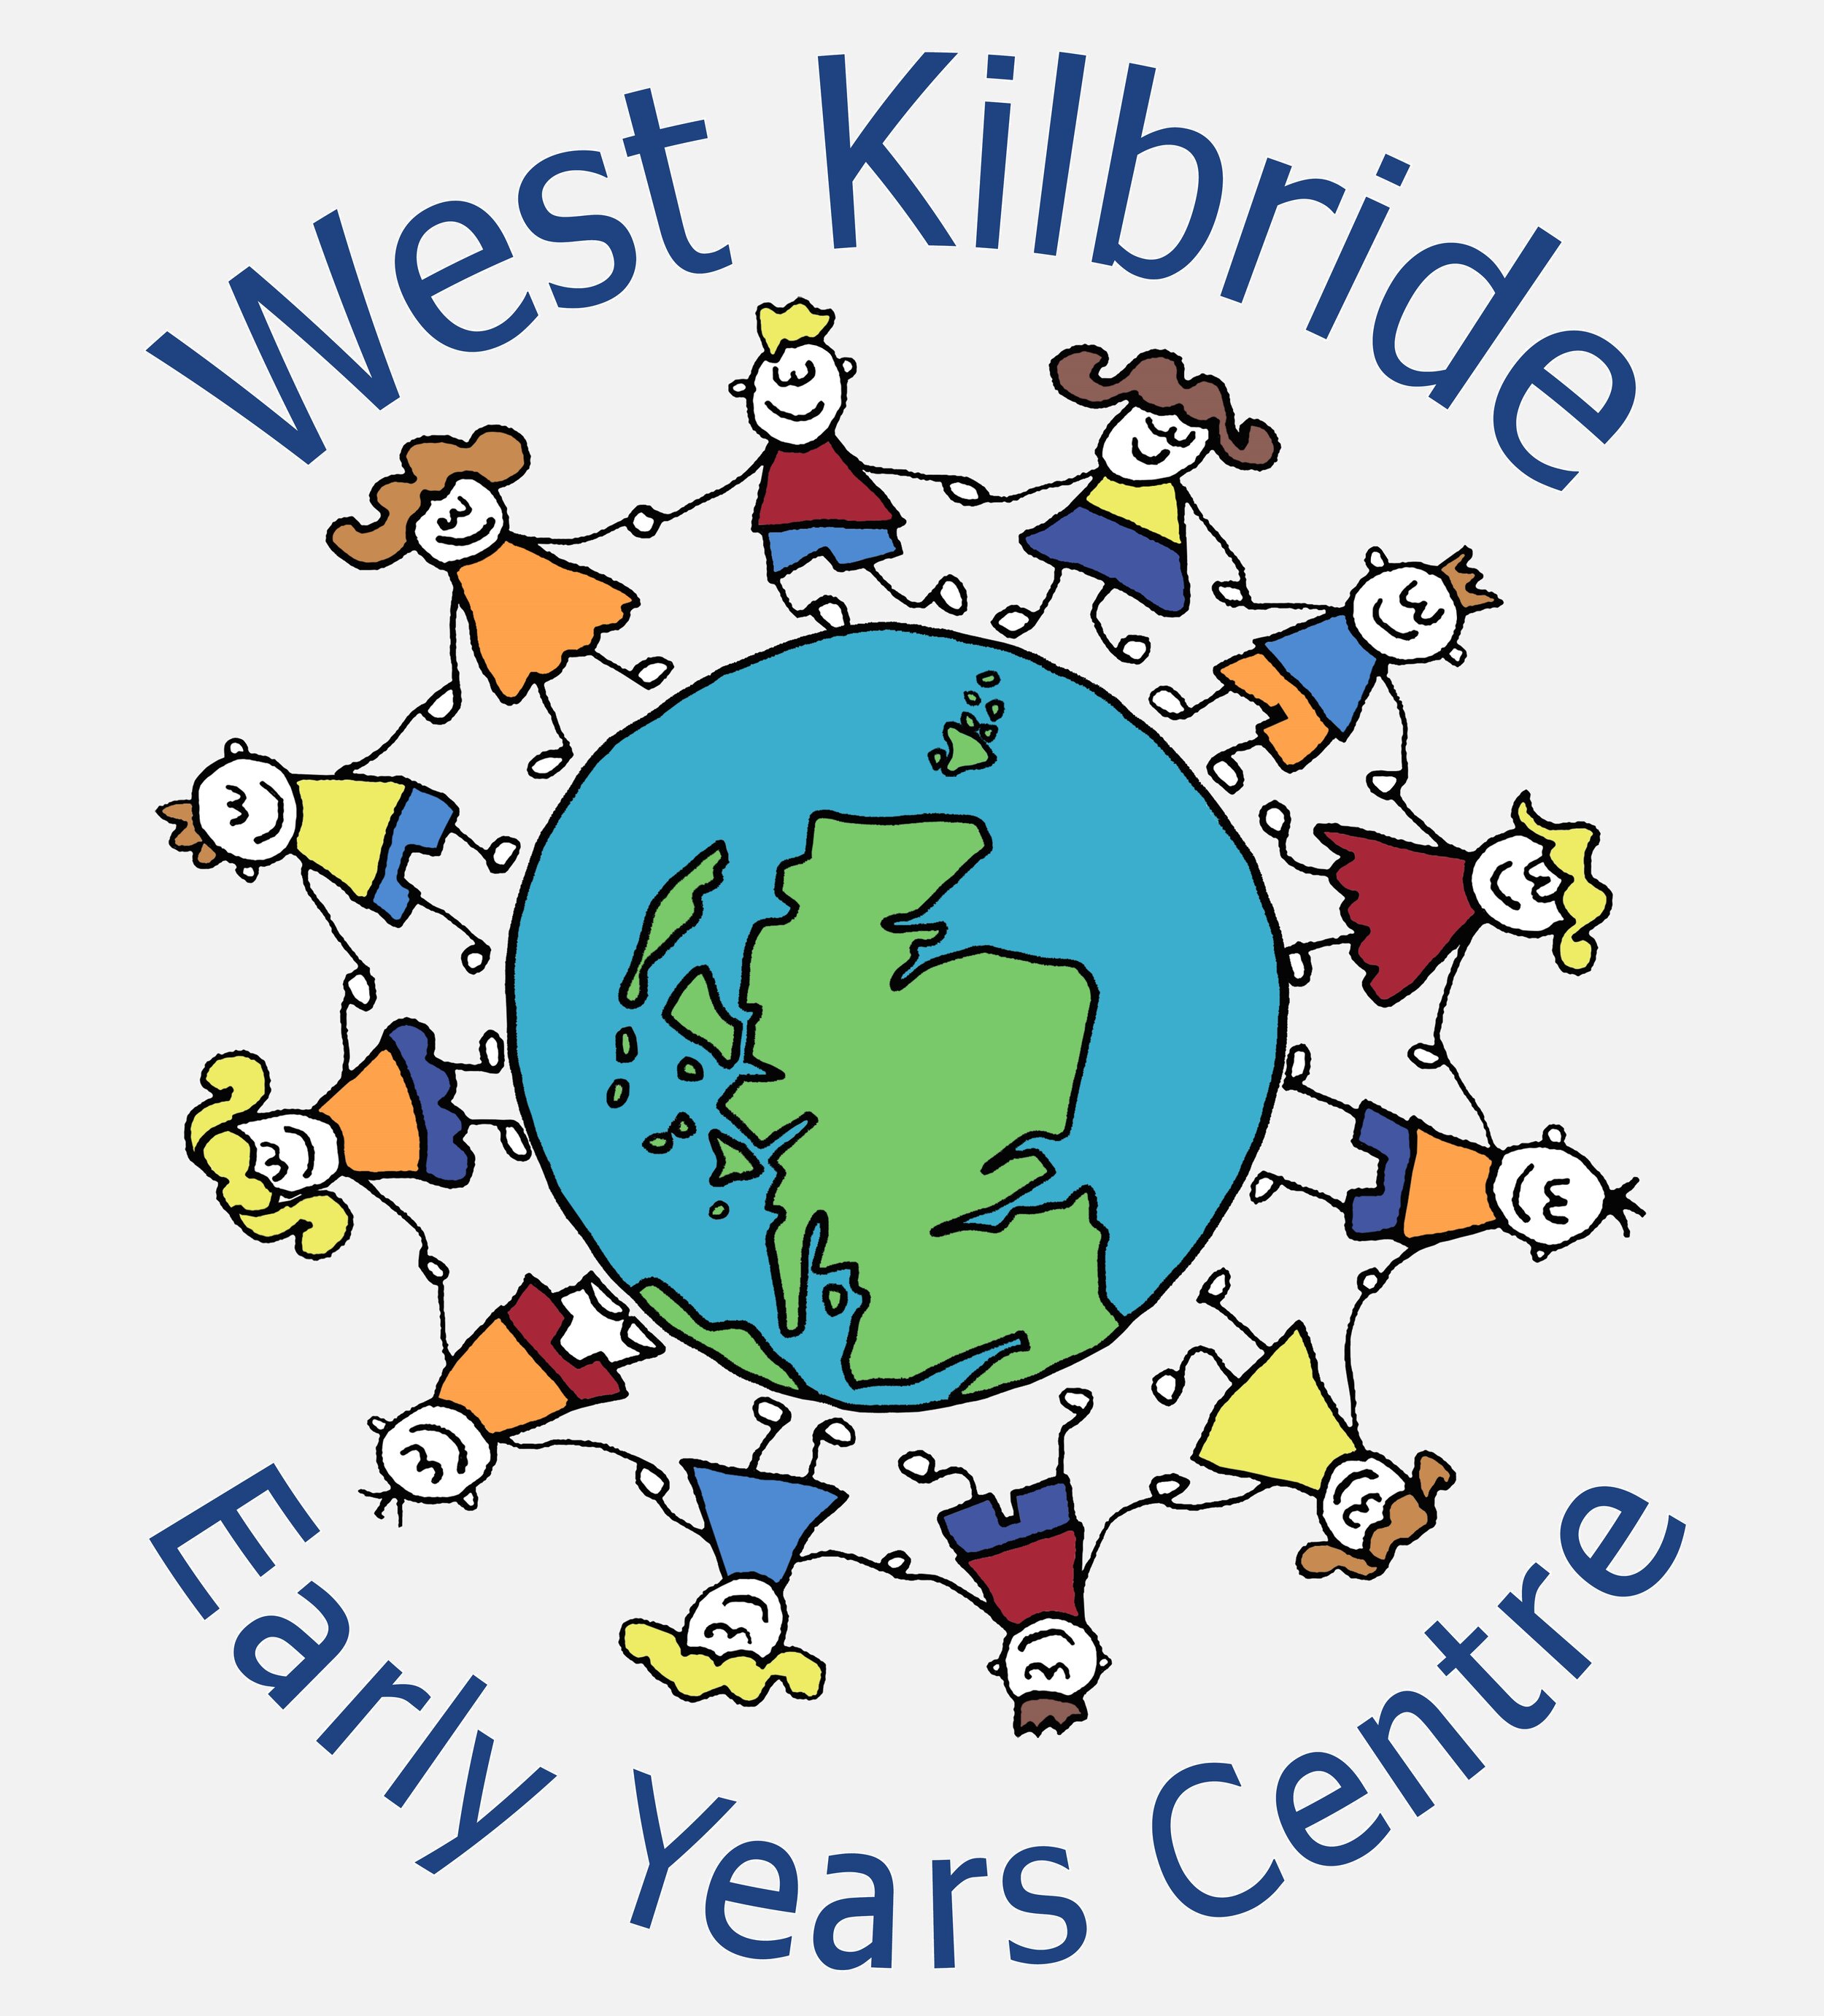 West Kilbride Early Years Centre